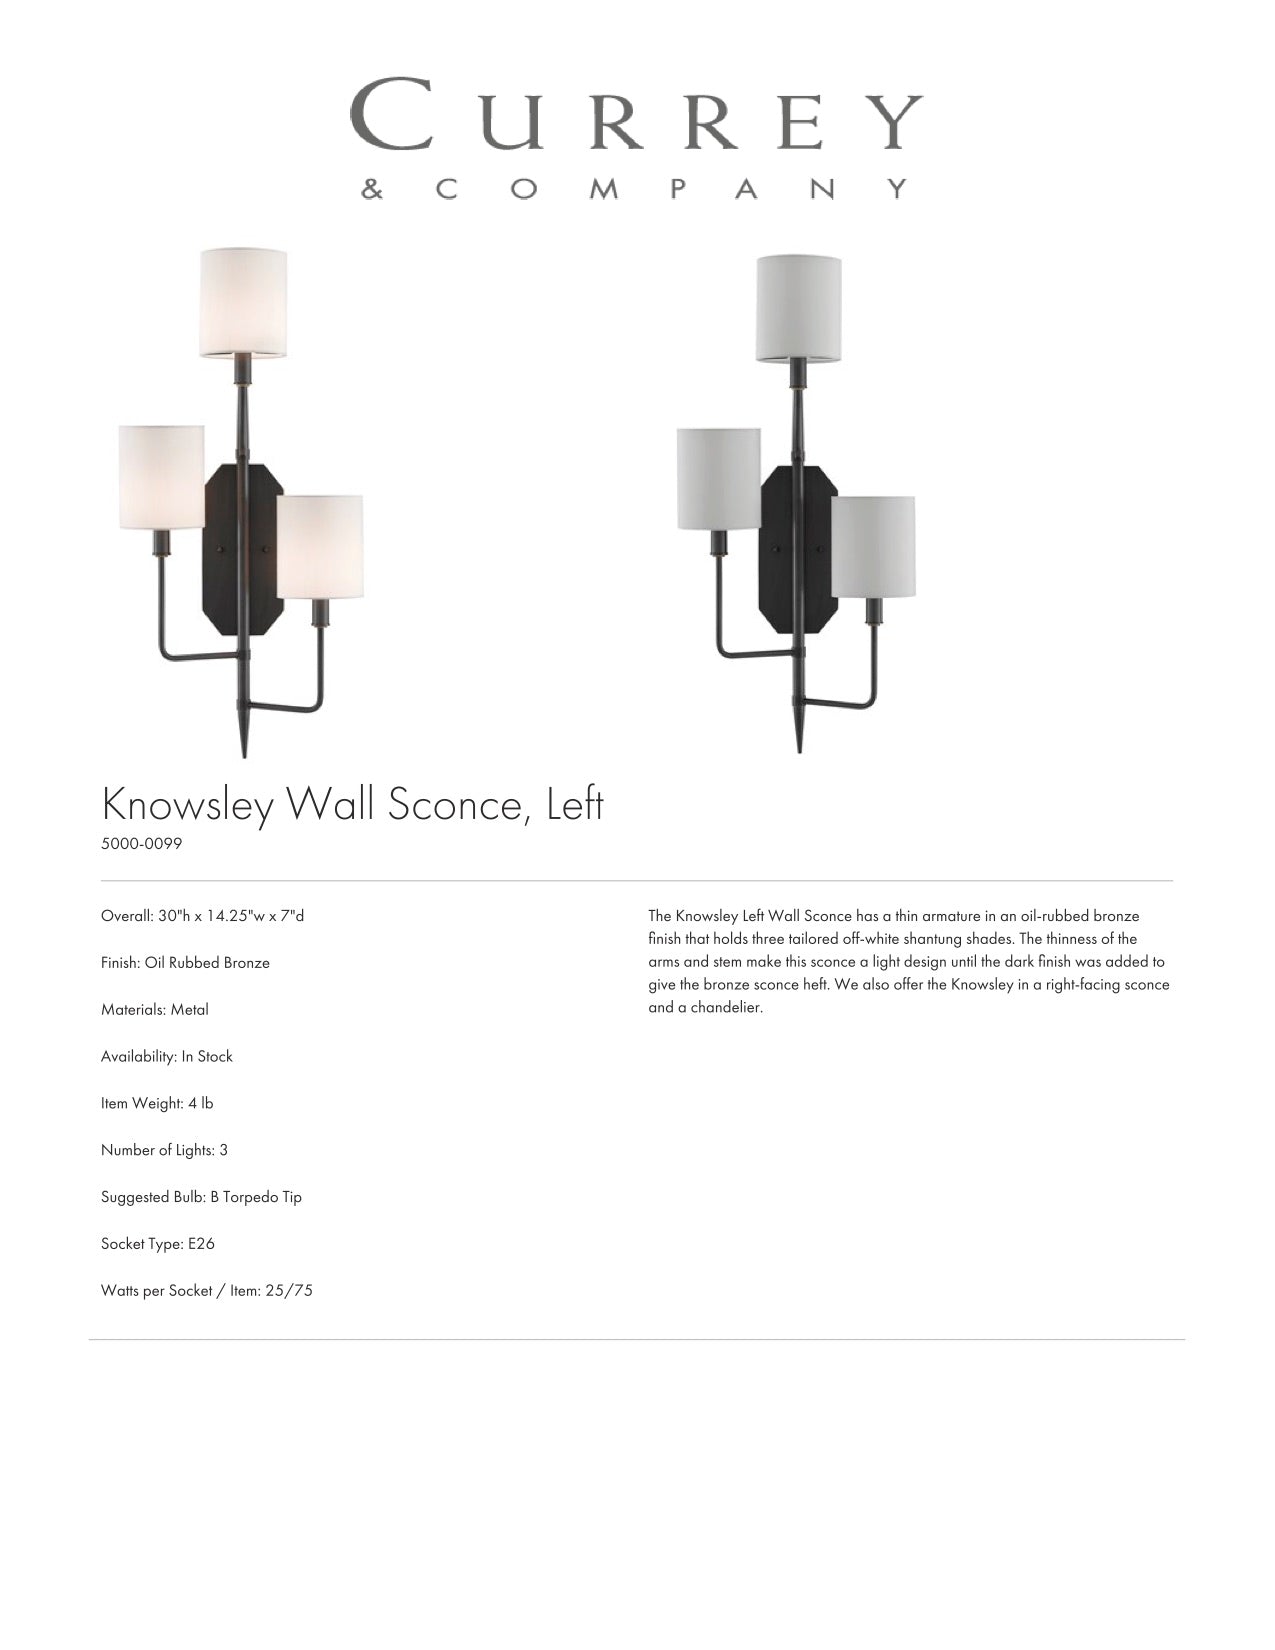 Currey & Company Knowsley Wall Sconce, Left Tearsheet